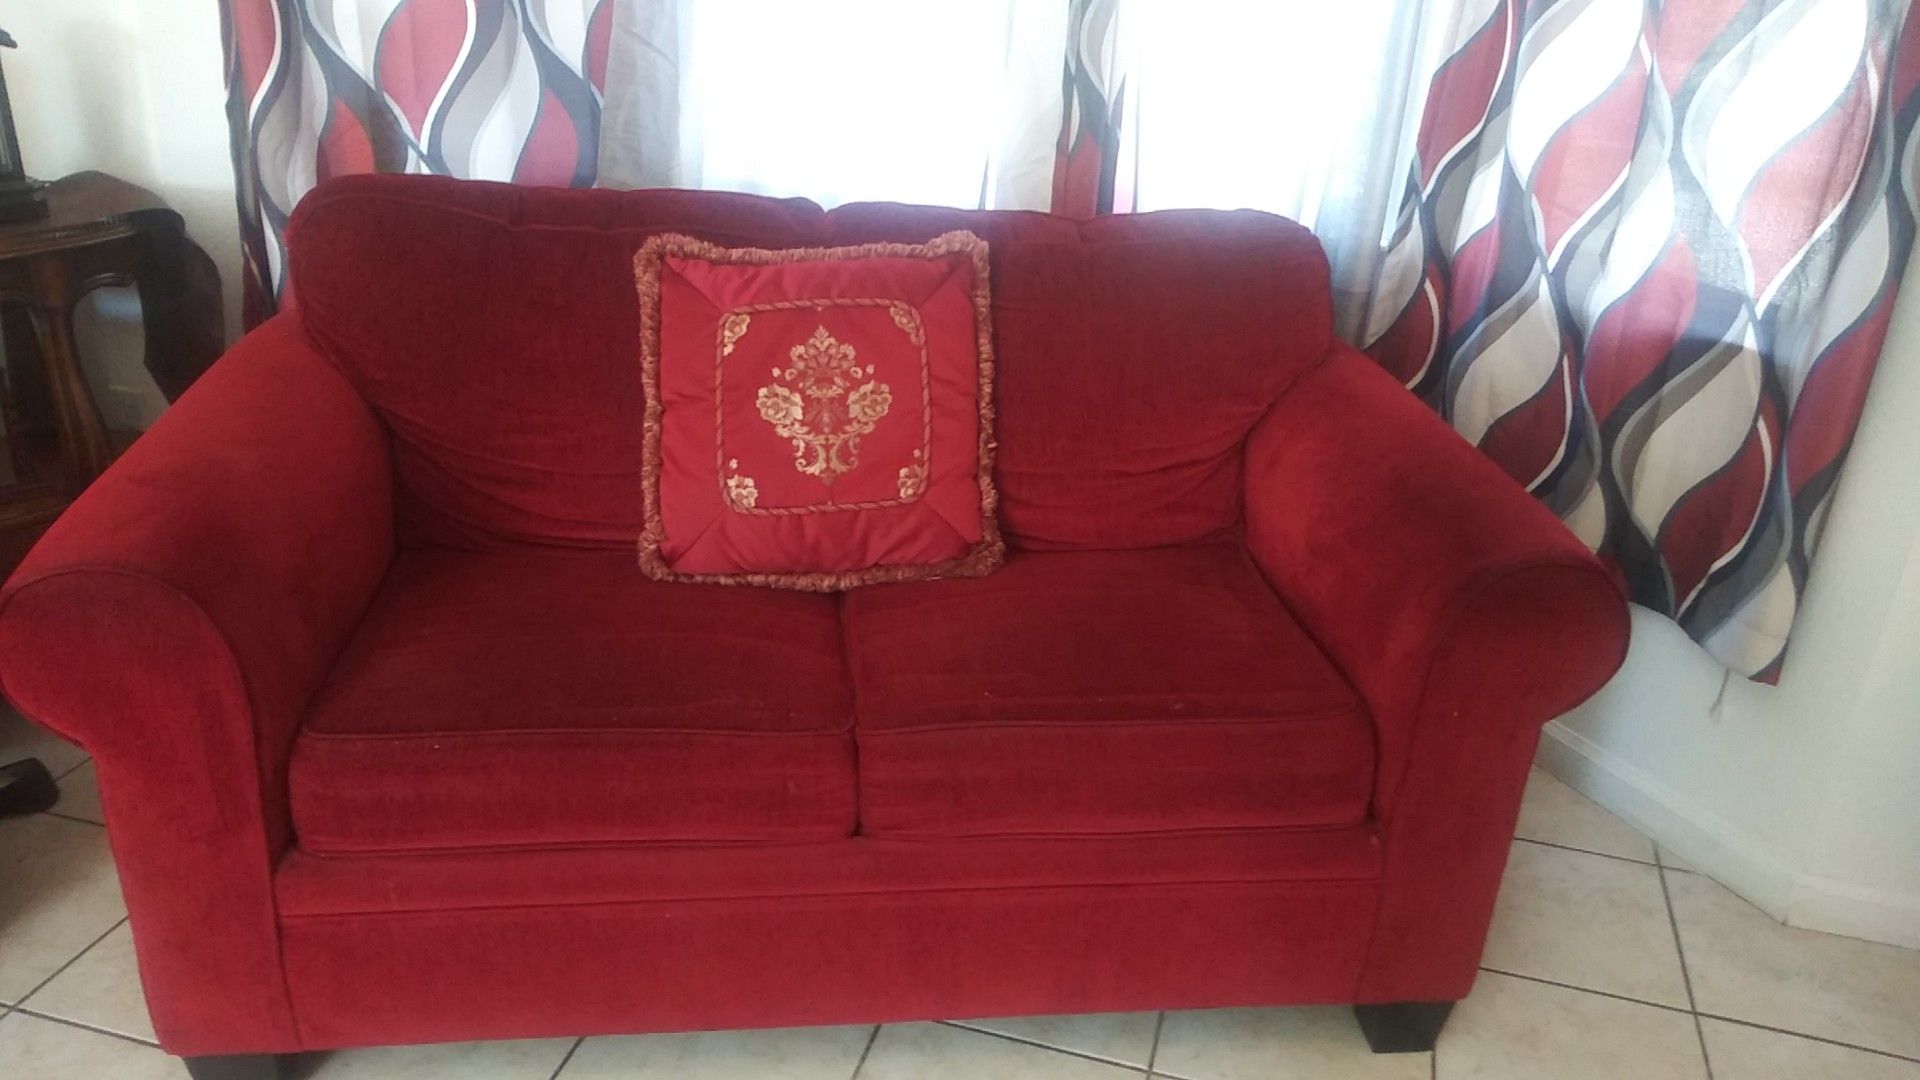 Red couch and loveseat almost new no tears good condition